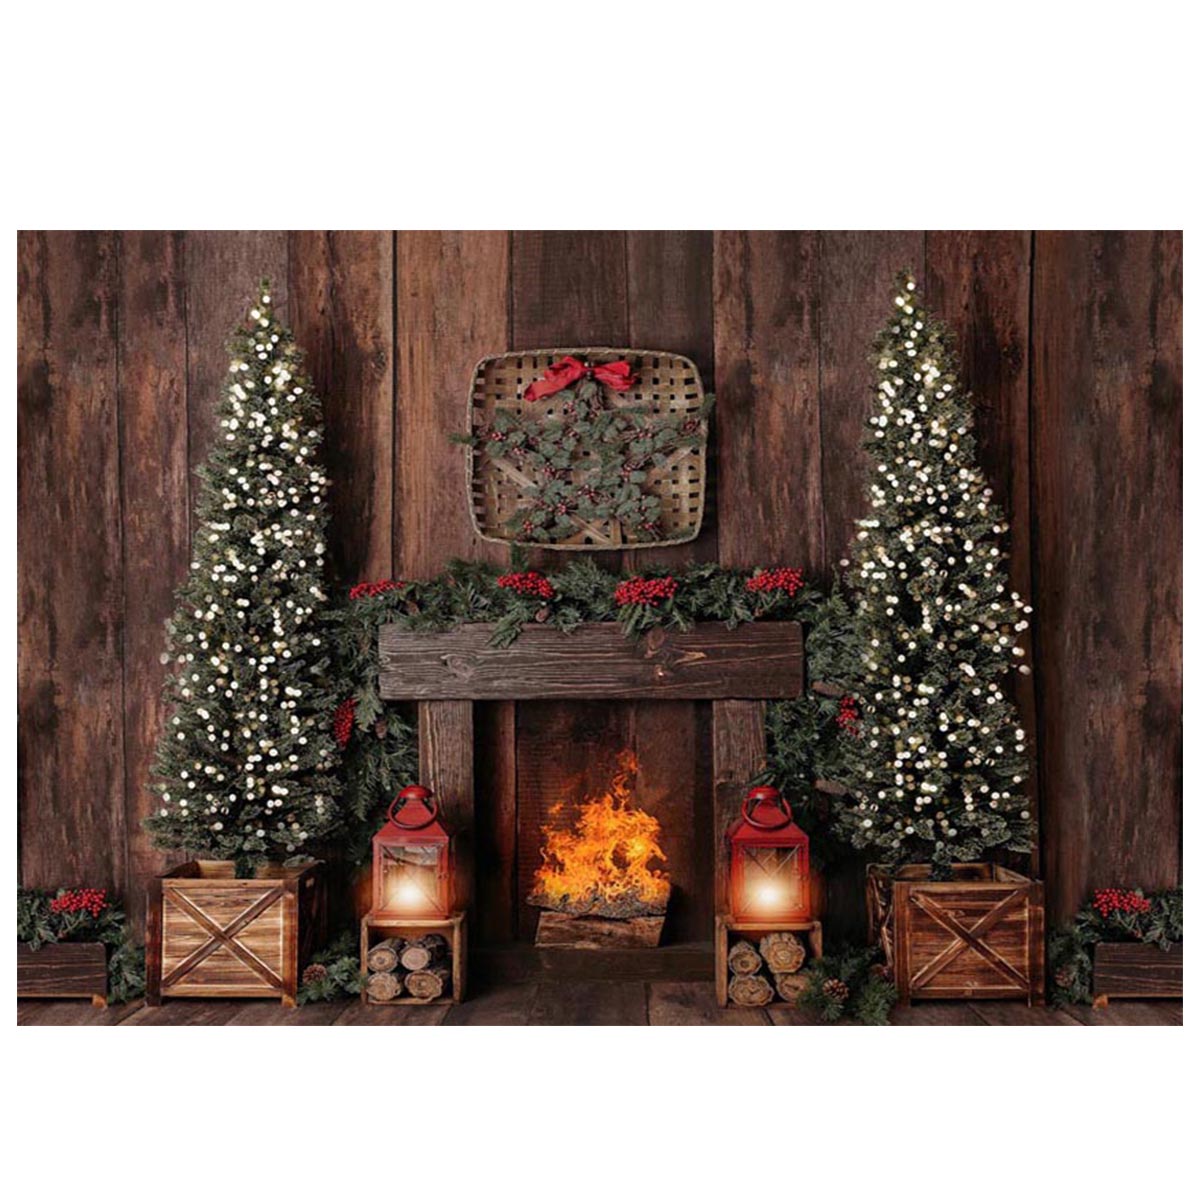 5x3FT-7x5FT-8x6FT-Wooden-Christmas-Fireplace-Photography-Backdrop-Background-Studio-Prop-1610115